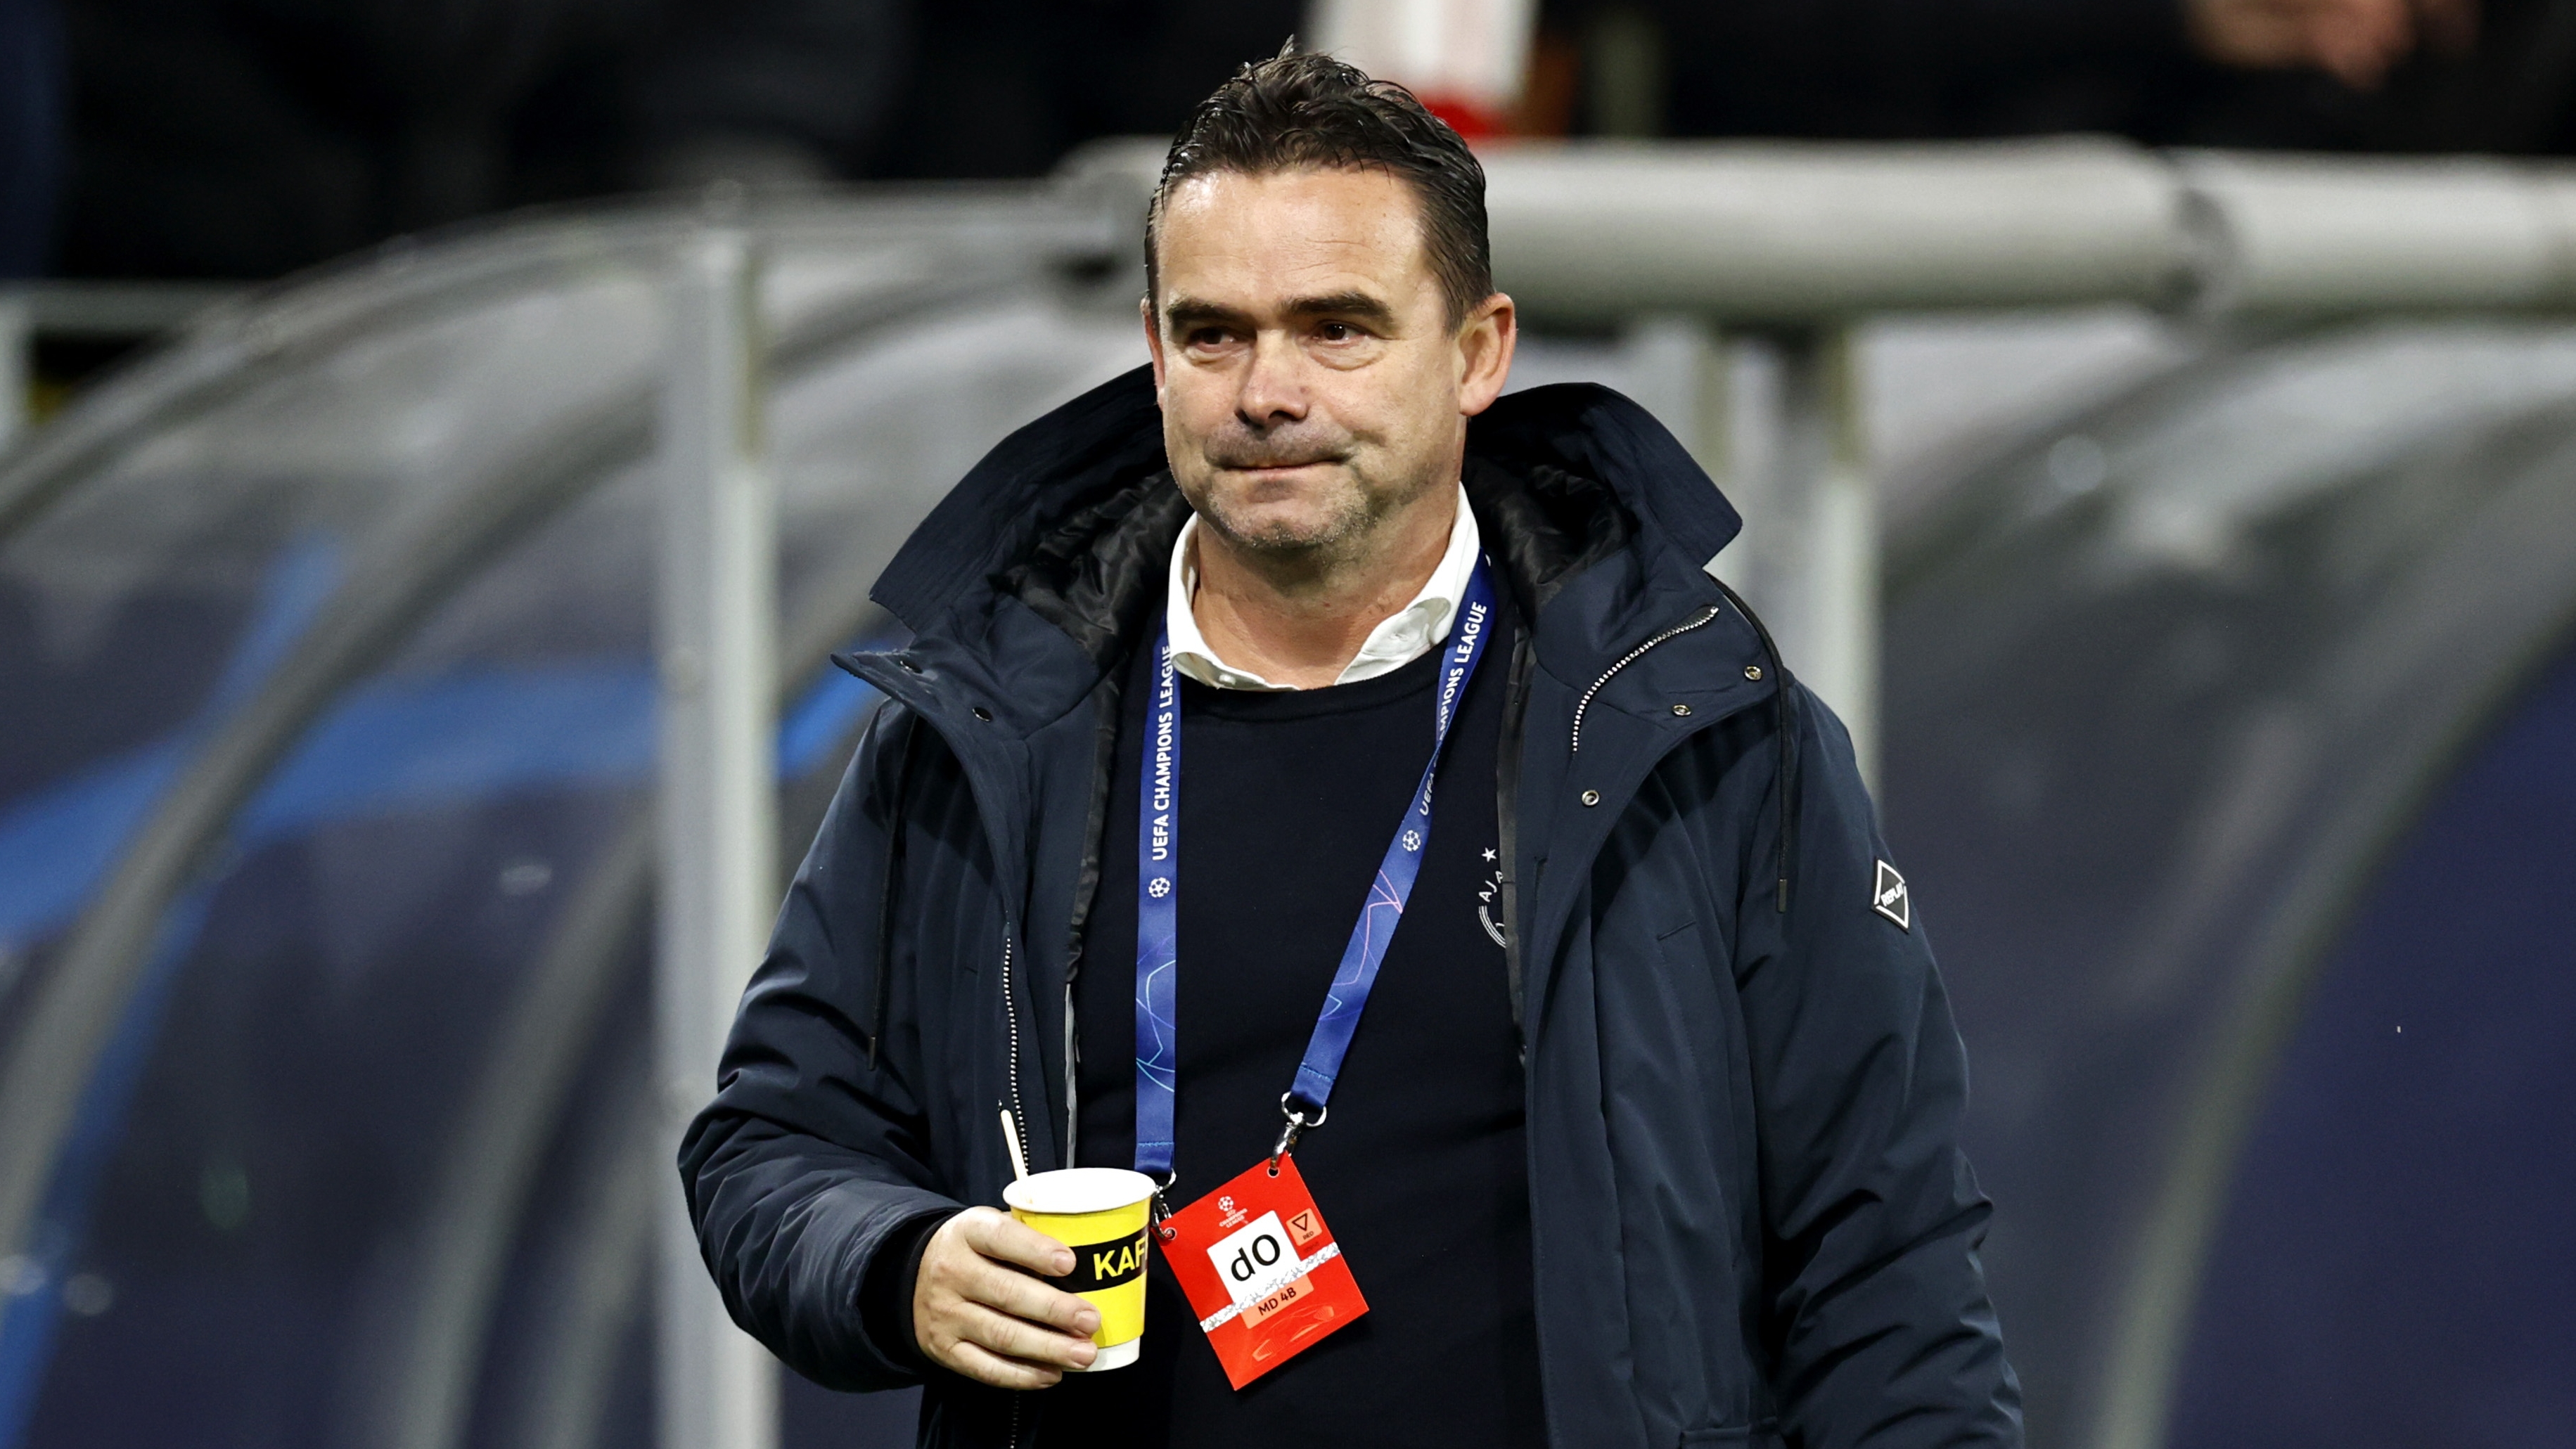 DORTMUND - Ajax technical director Marc Overmars during the UEFA Champions League match between Borussia Dortmund and Ajax Amsterdam at the Signal Iduna Park on November 3, 2021 in Dortmund, Germany.  ANP MAURICE VAN STEEN (Photo by ANP Sport via Getty Images)